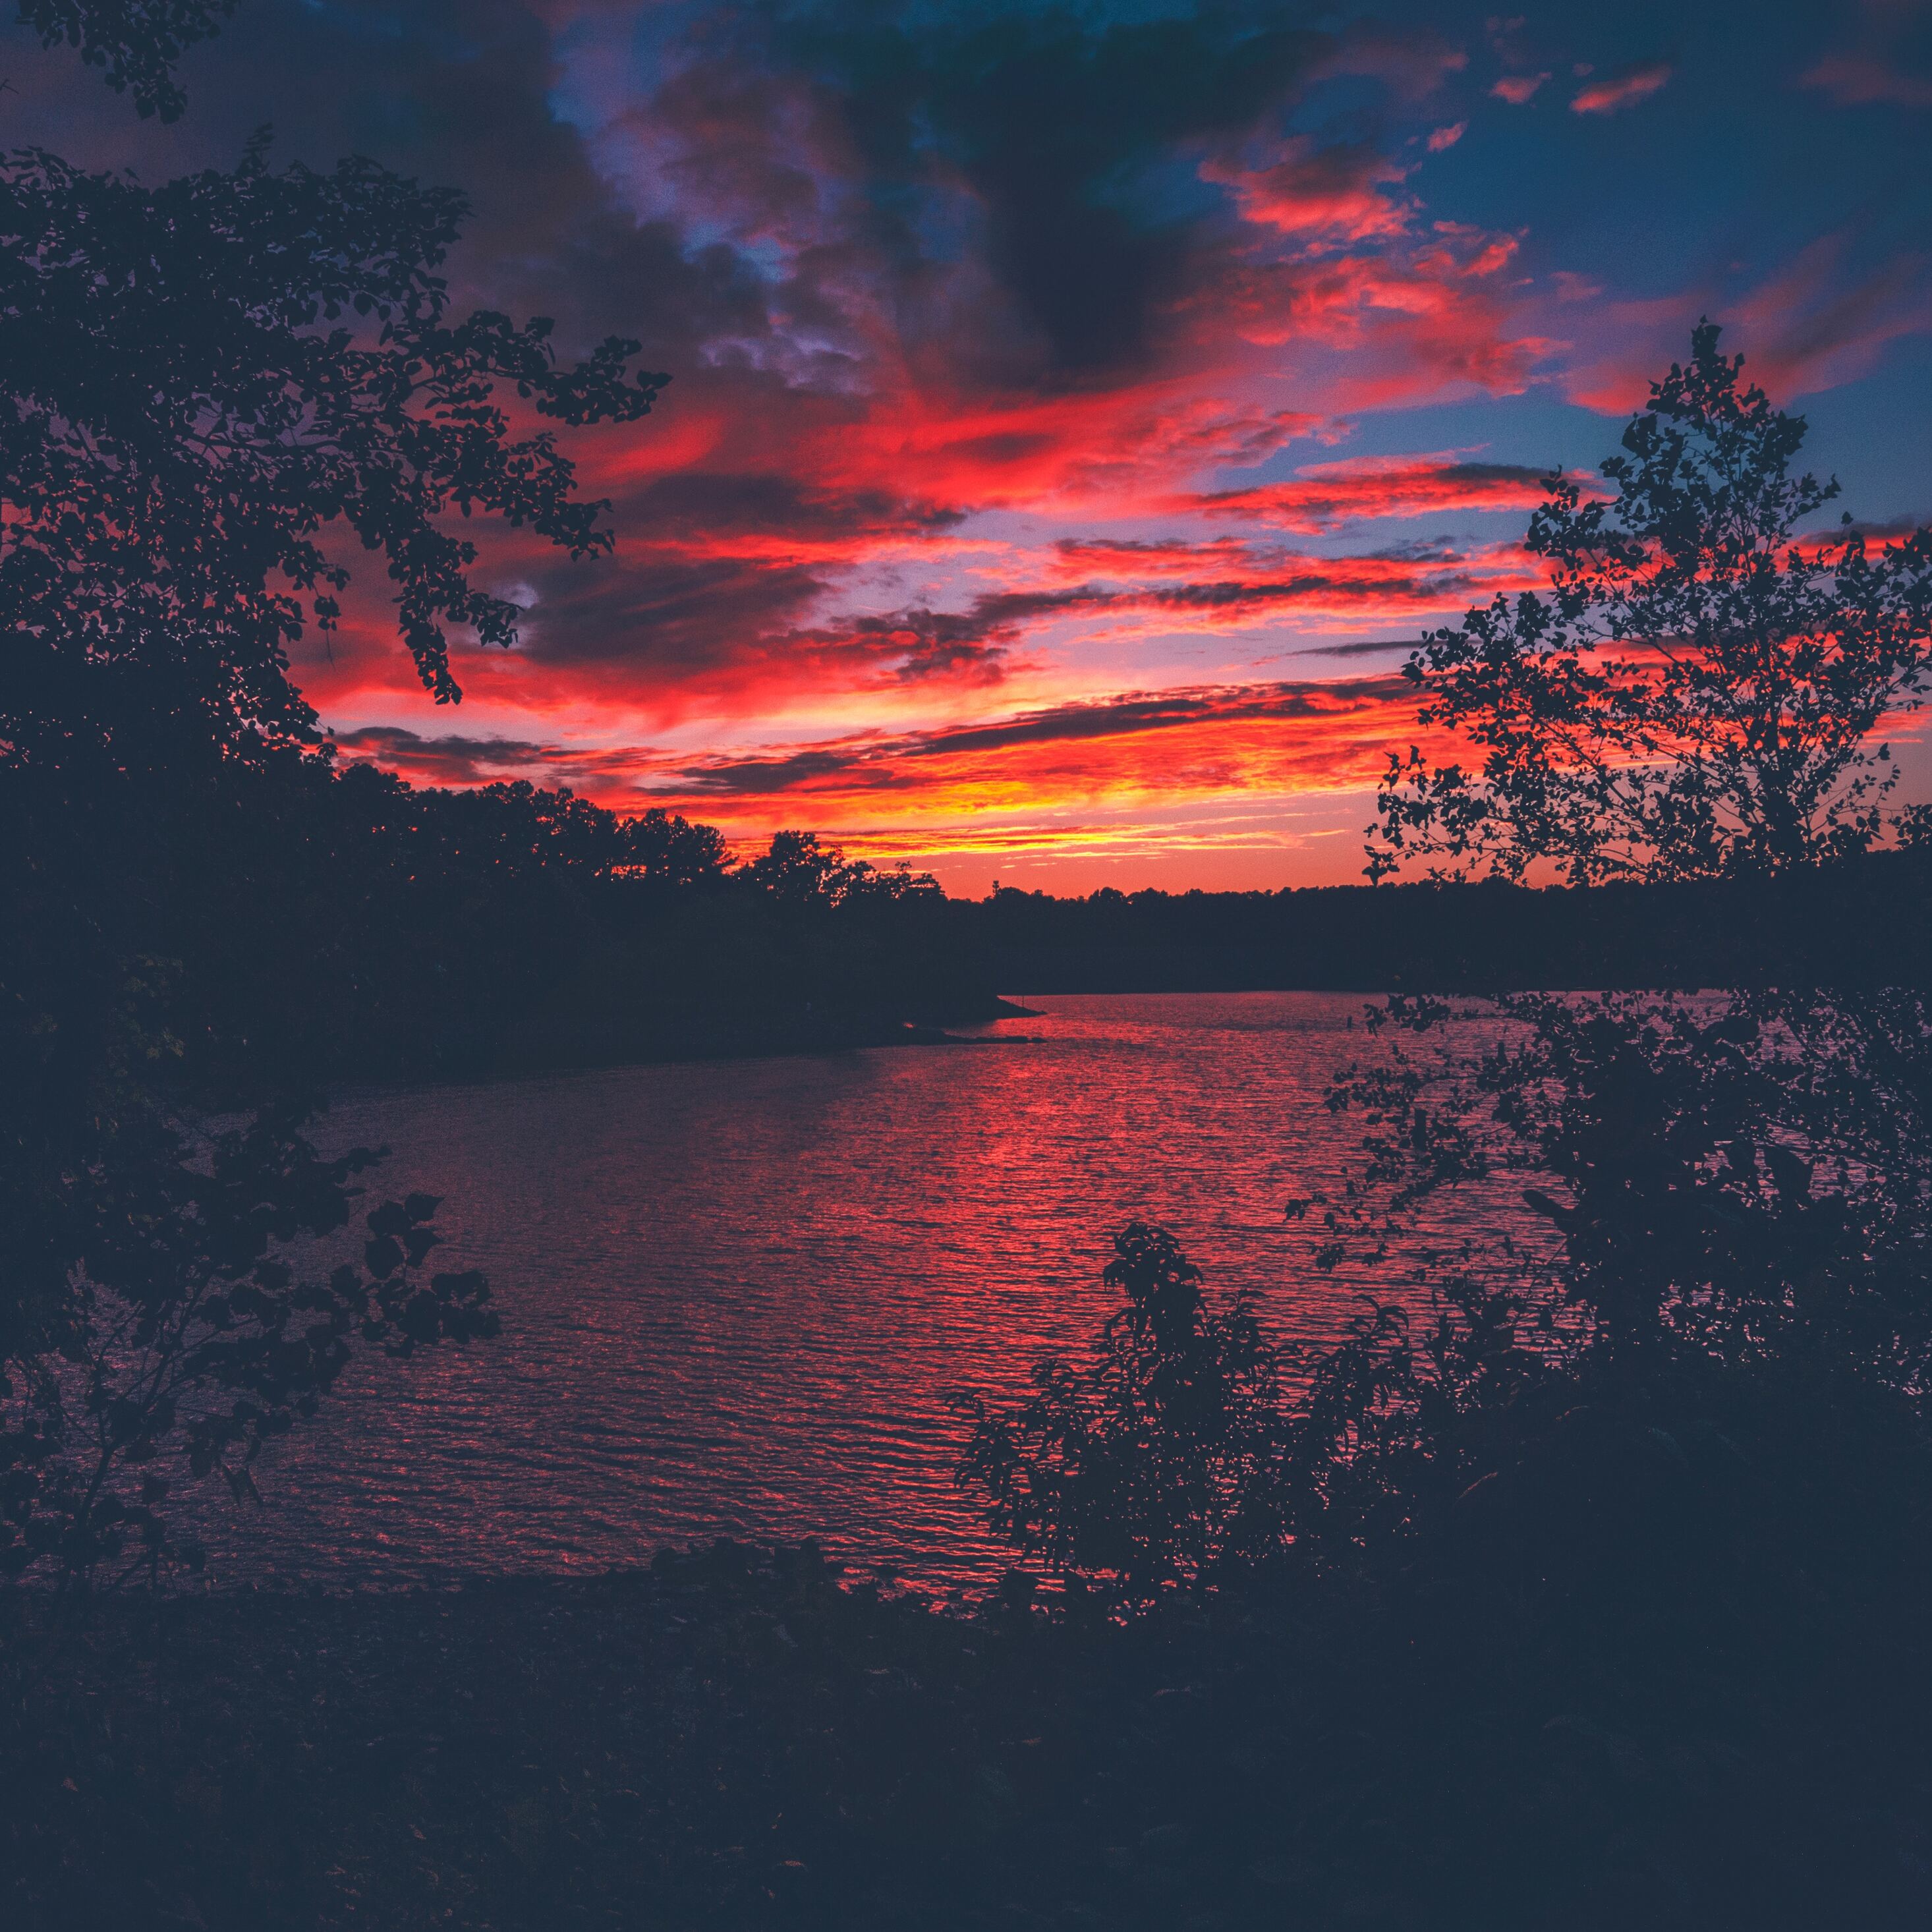 Red Evening Sunset Lake View From Forest Woods iPad Pro Retina Display HD 4k Wallpaper, Image, Background, Photo and Picture